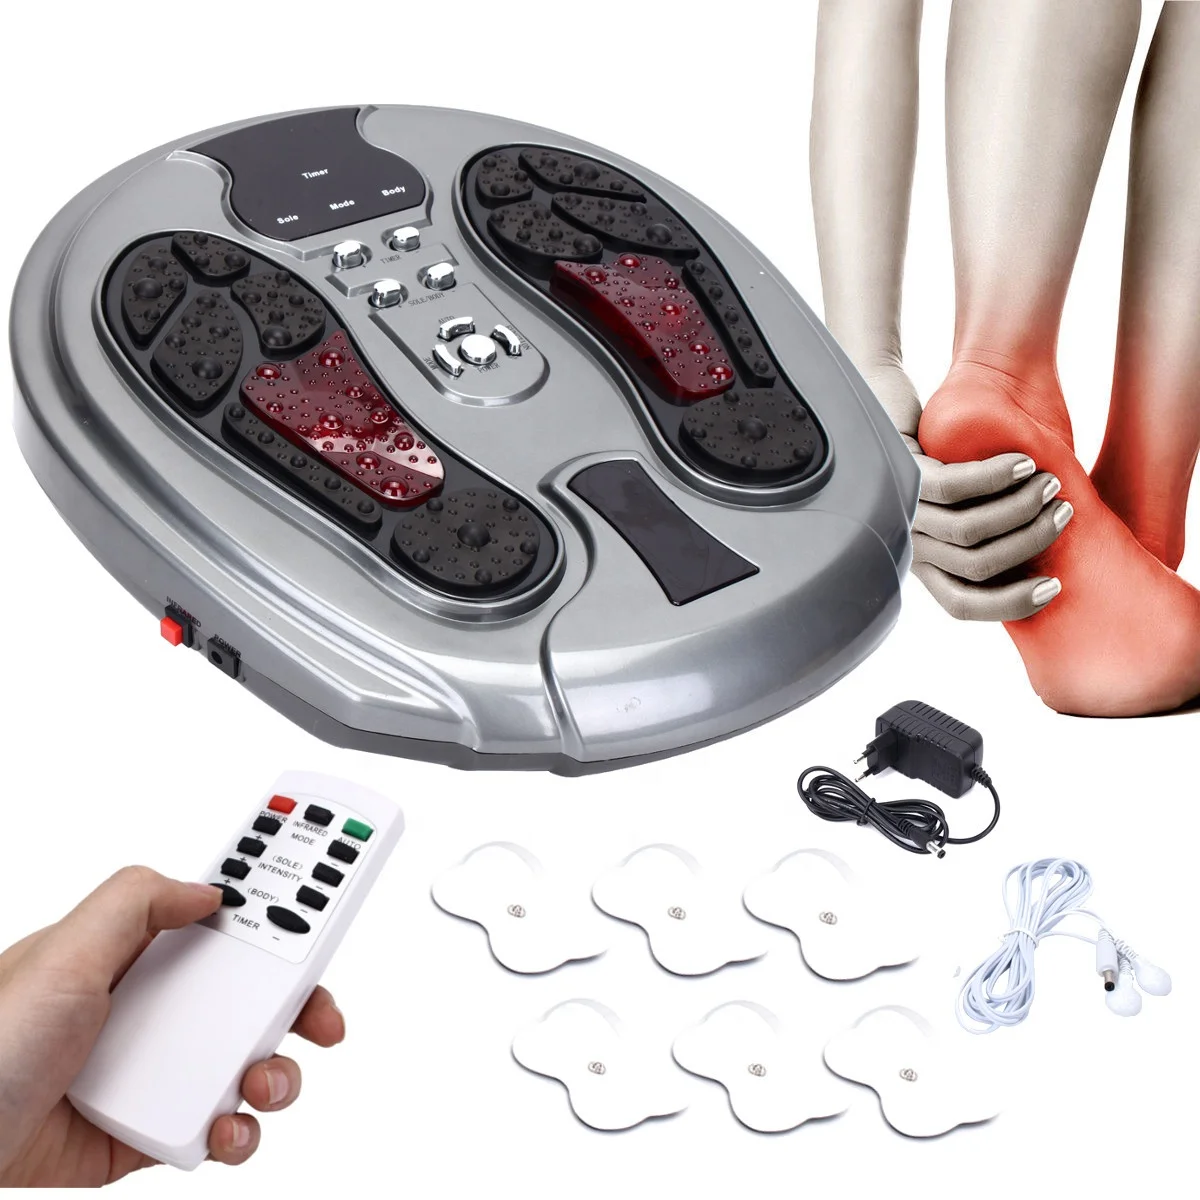 ROTAI Vibration Foot Massager Multi Relaxations and Pain Relief Rotating Acupressure Electric Foot Circulation Device with Remote Control Orange 